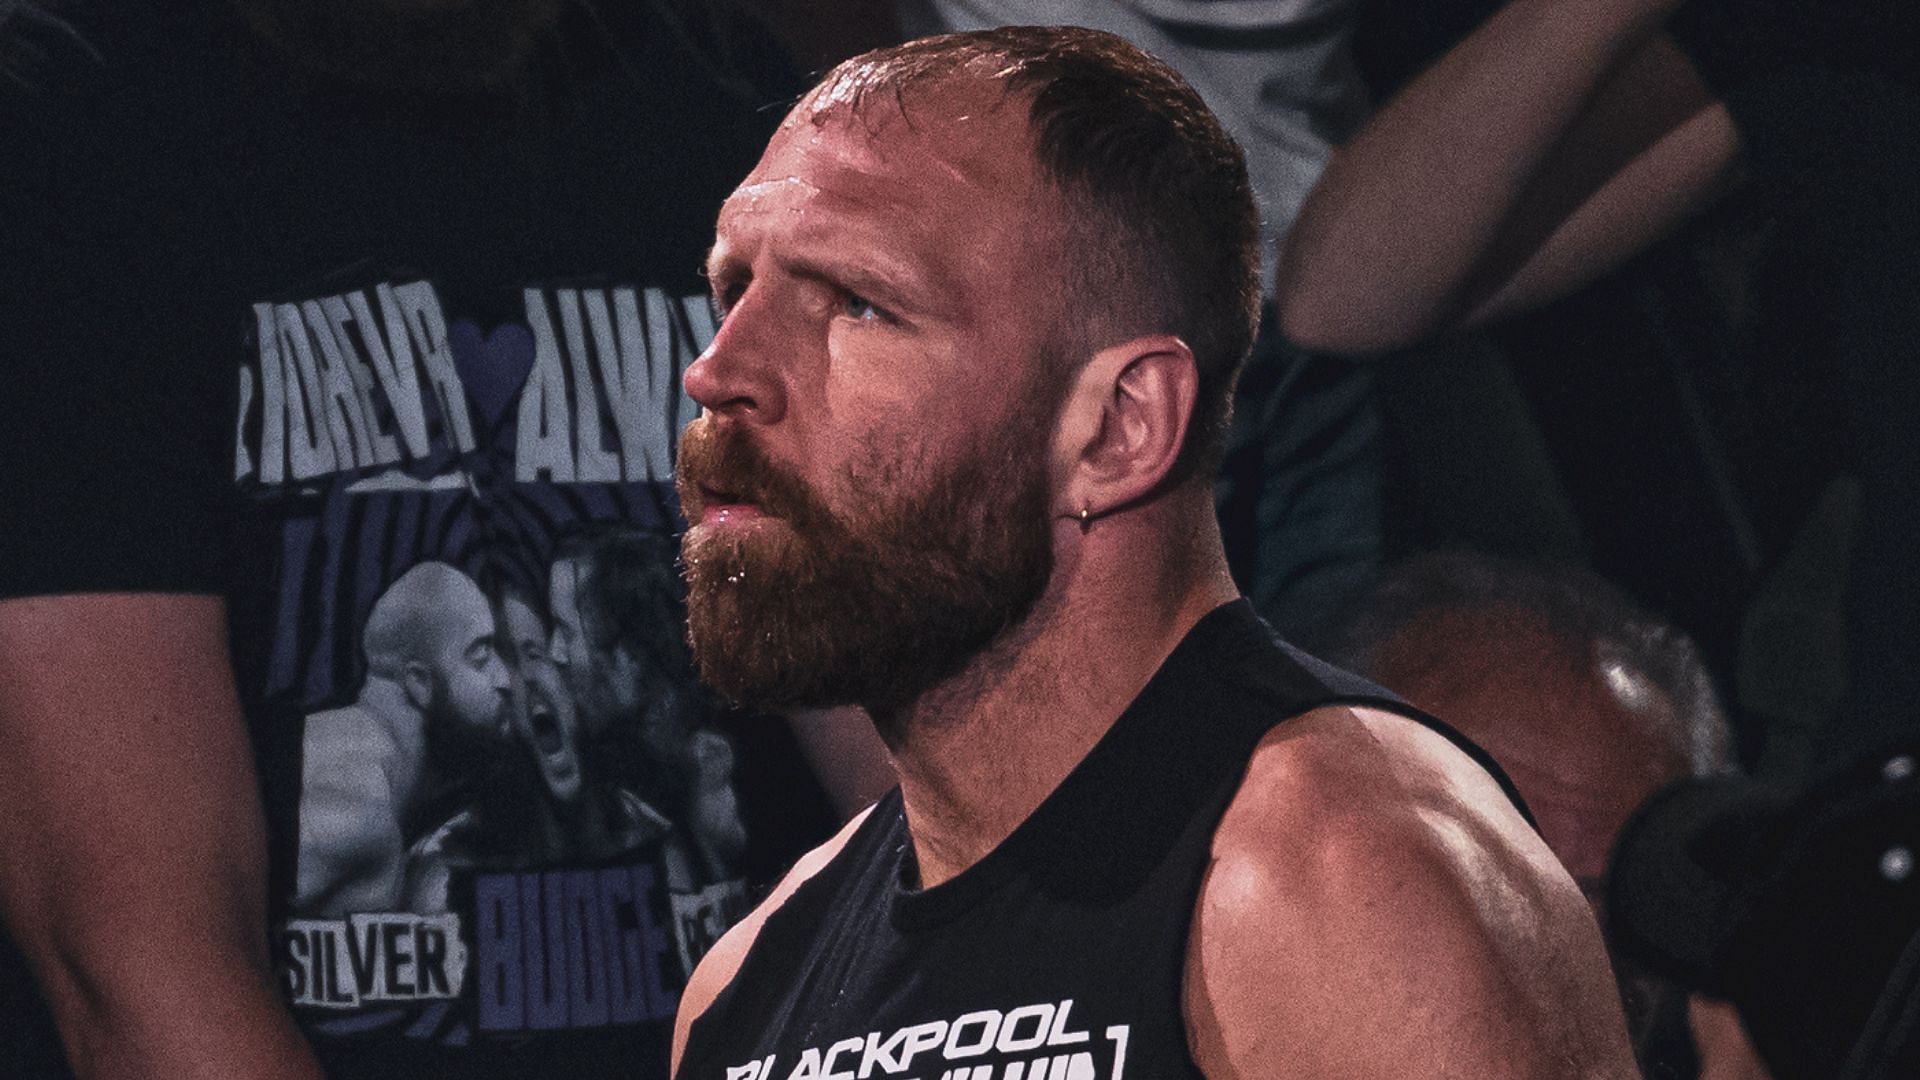 Jon Moxley to turn on Blackpool Combat Club and align with major AEW star soon?